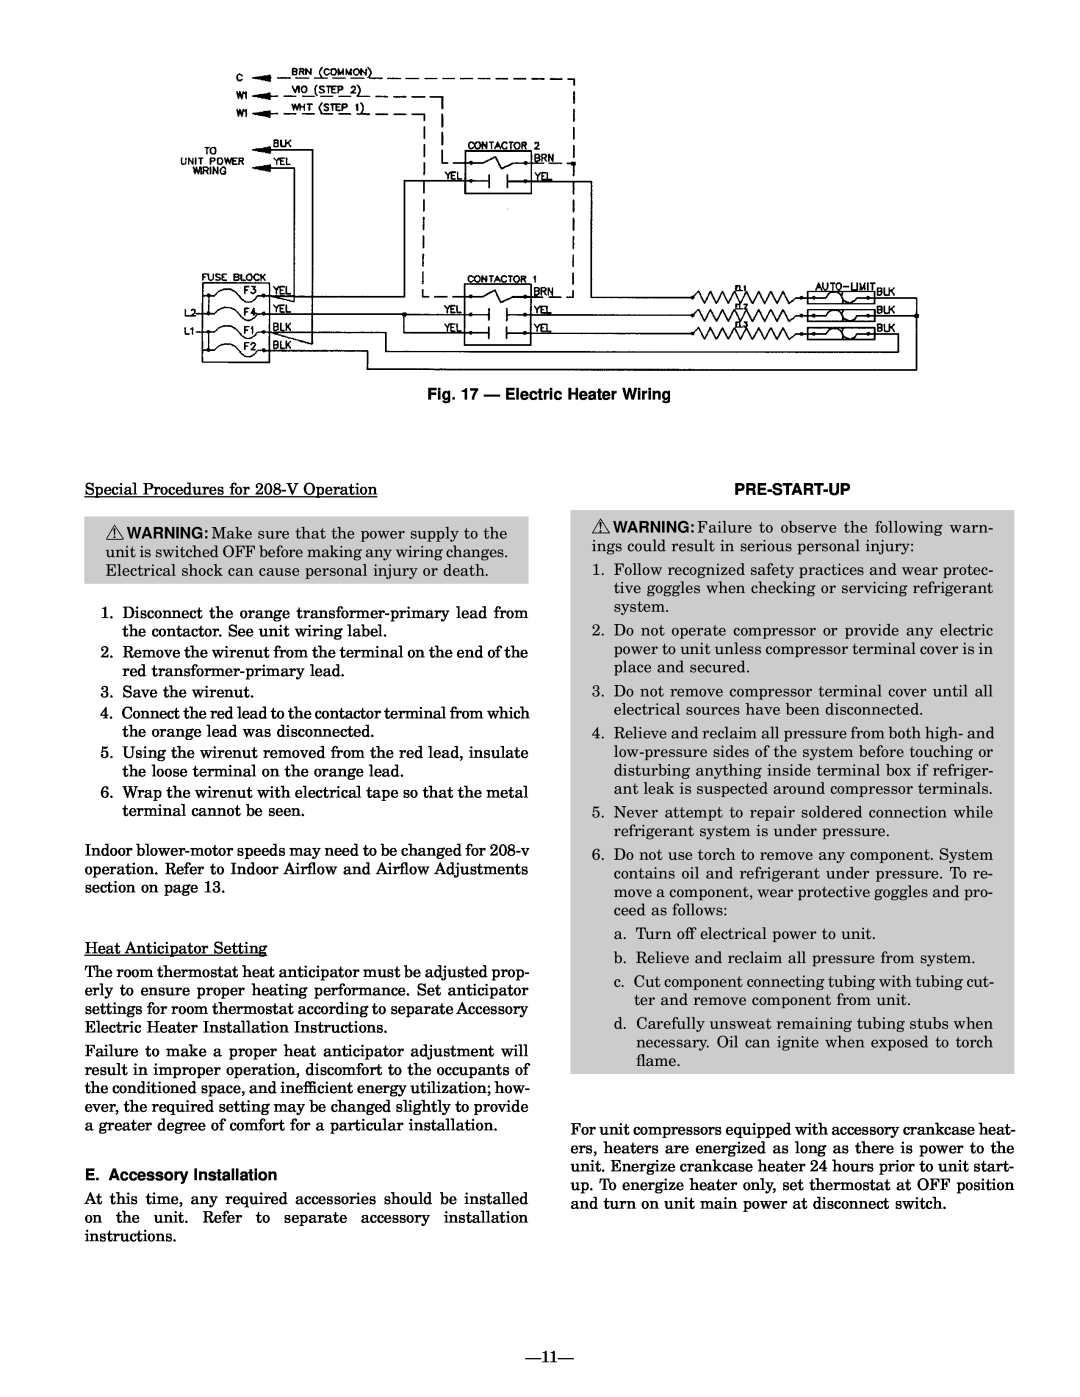 Bryant 764A installation instructions Ð Electric Heater Wiring, Pre-Start-Up, E. Accessory Installation 